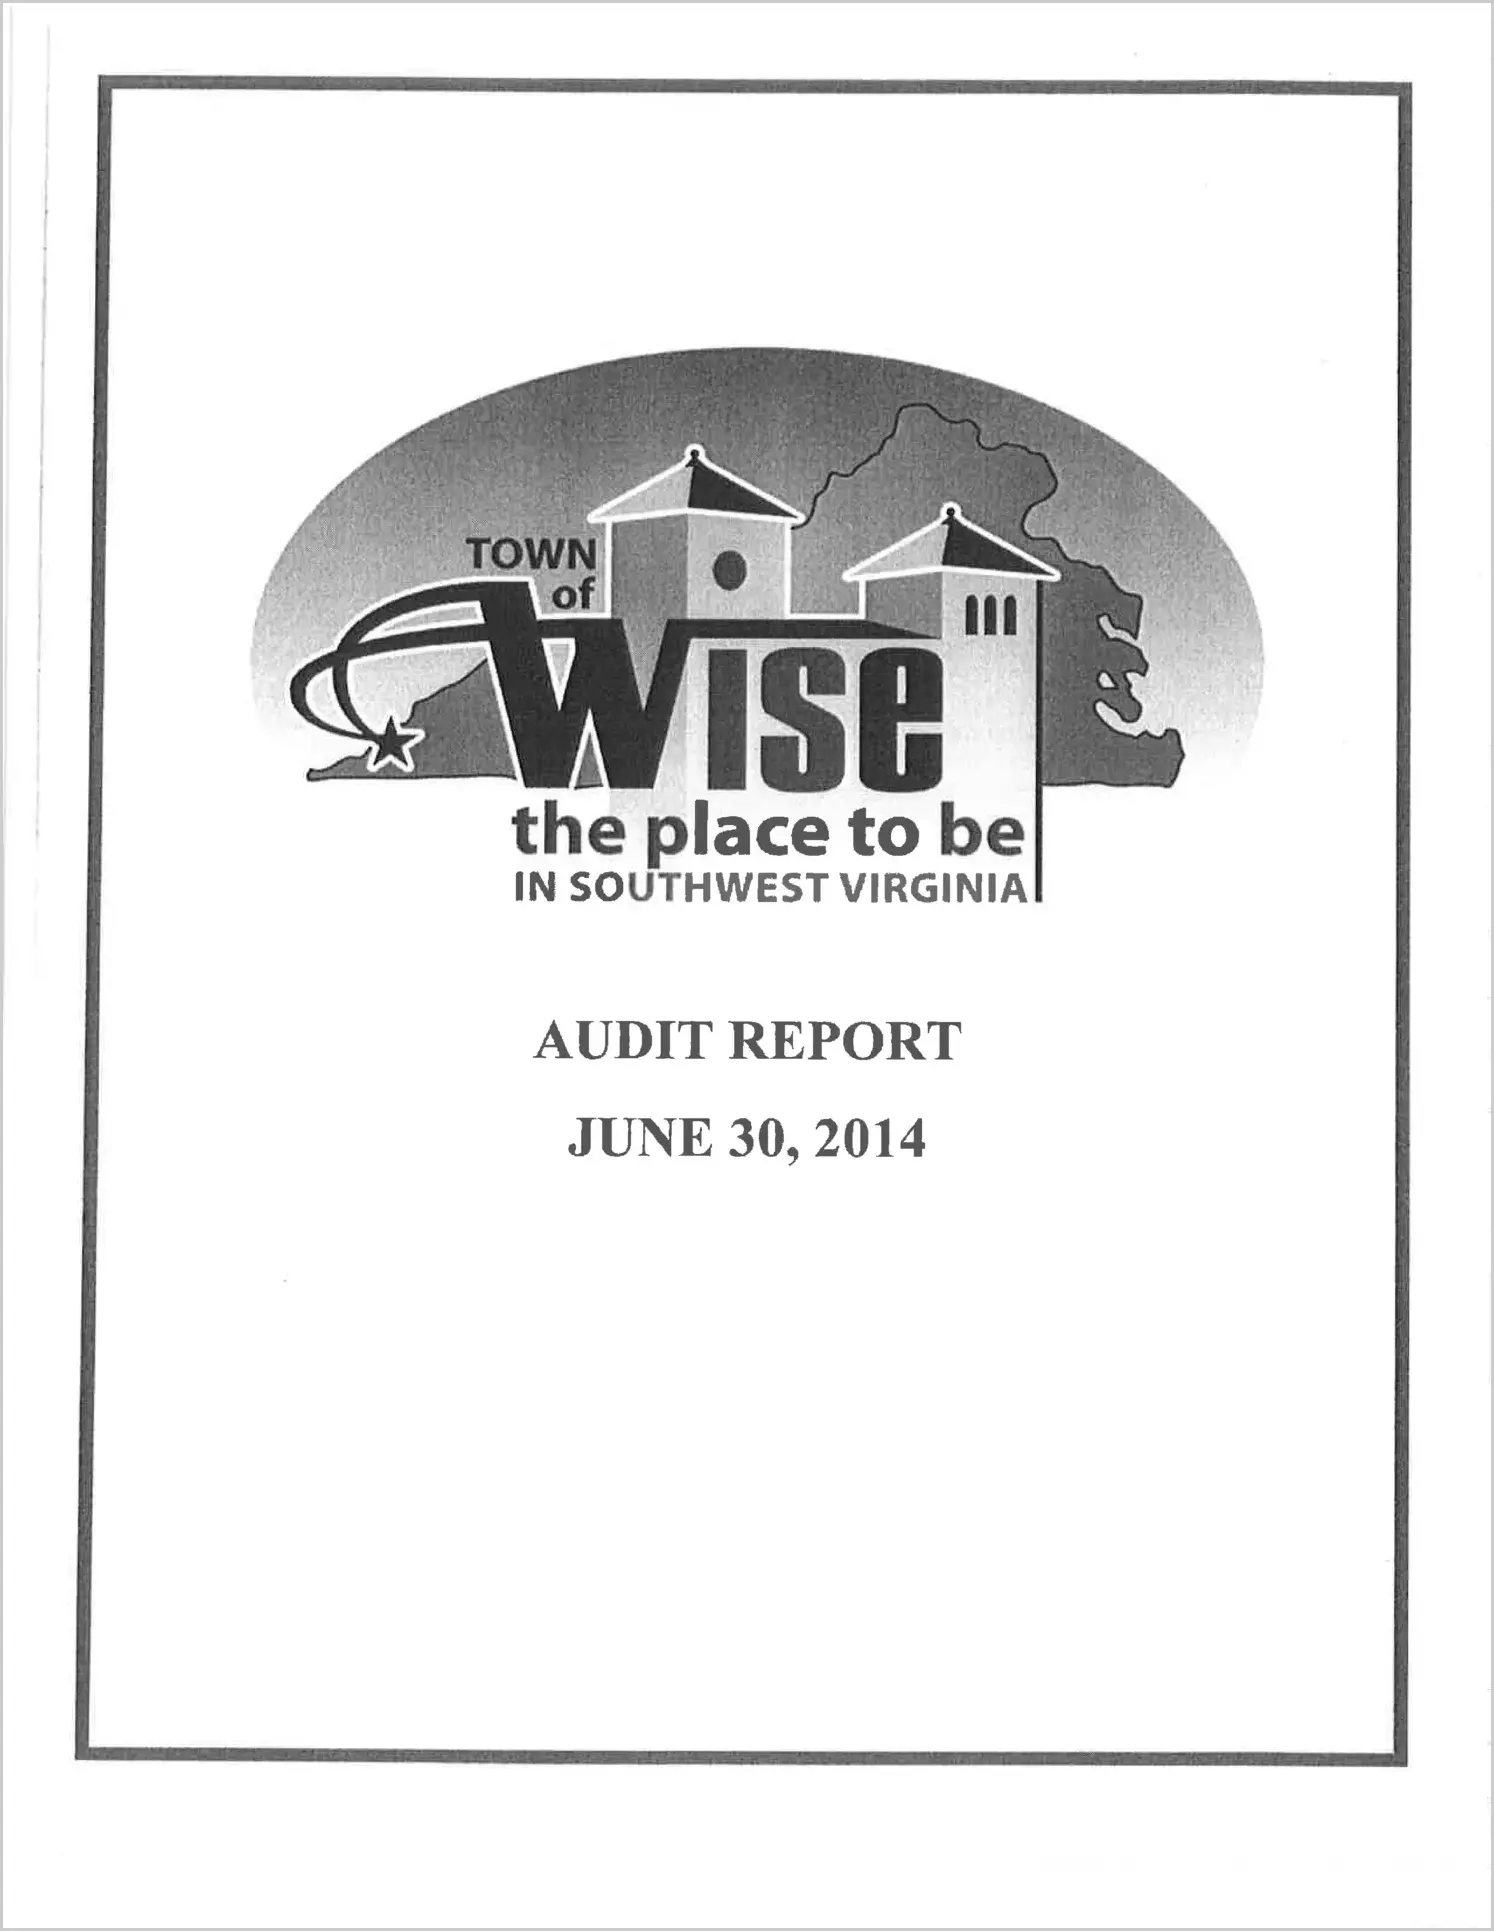 2014 Annual Financial Report for Town of Wise